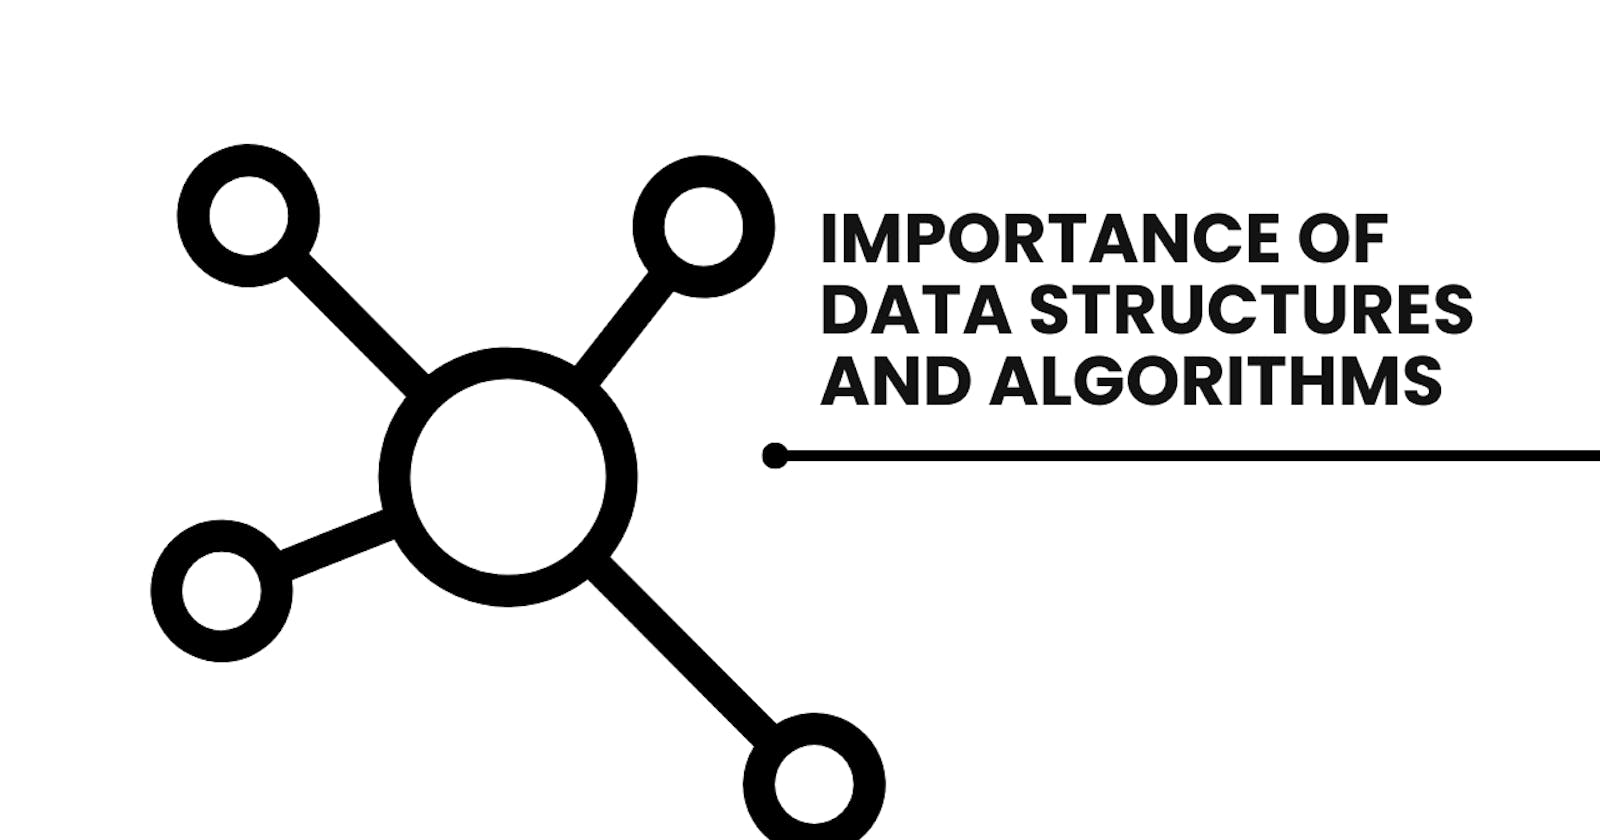 The Importance of Data Structures and Algorithms